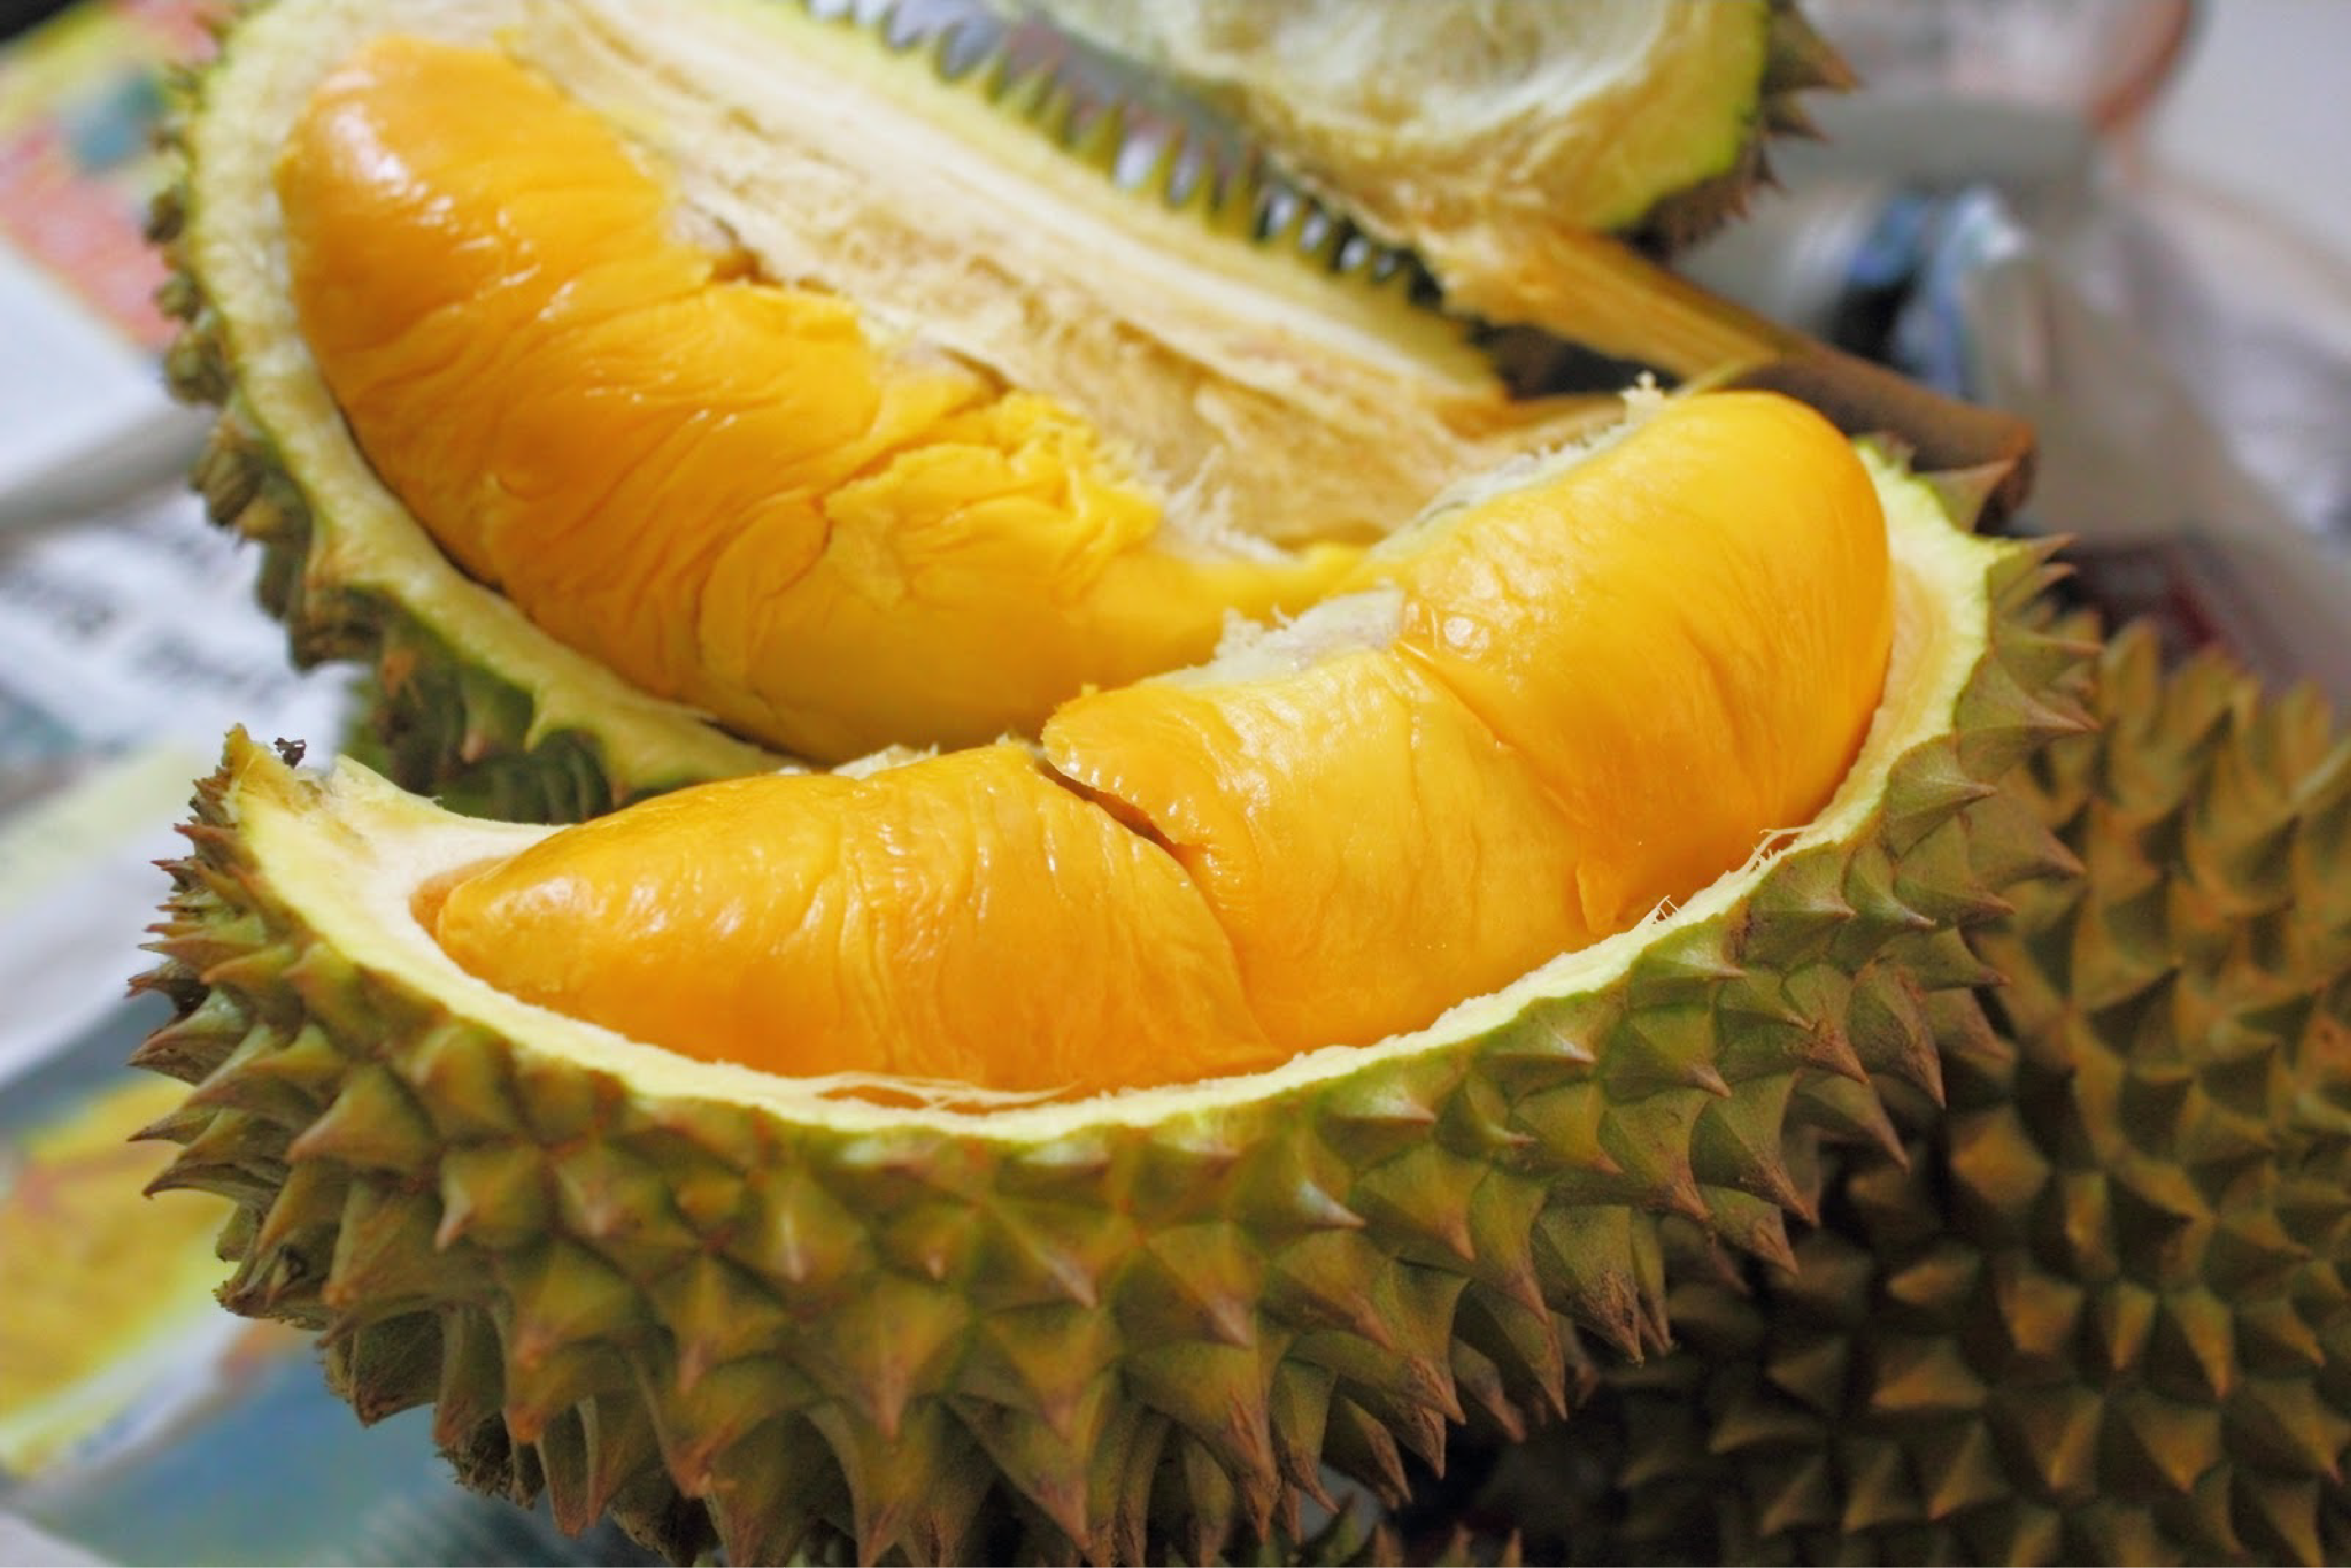 #DurianKing: Bukit Bintang Branch Opens, Free Durians For Visitors ...